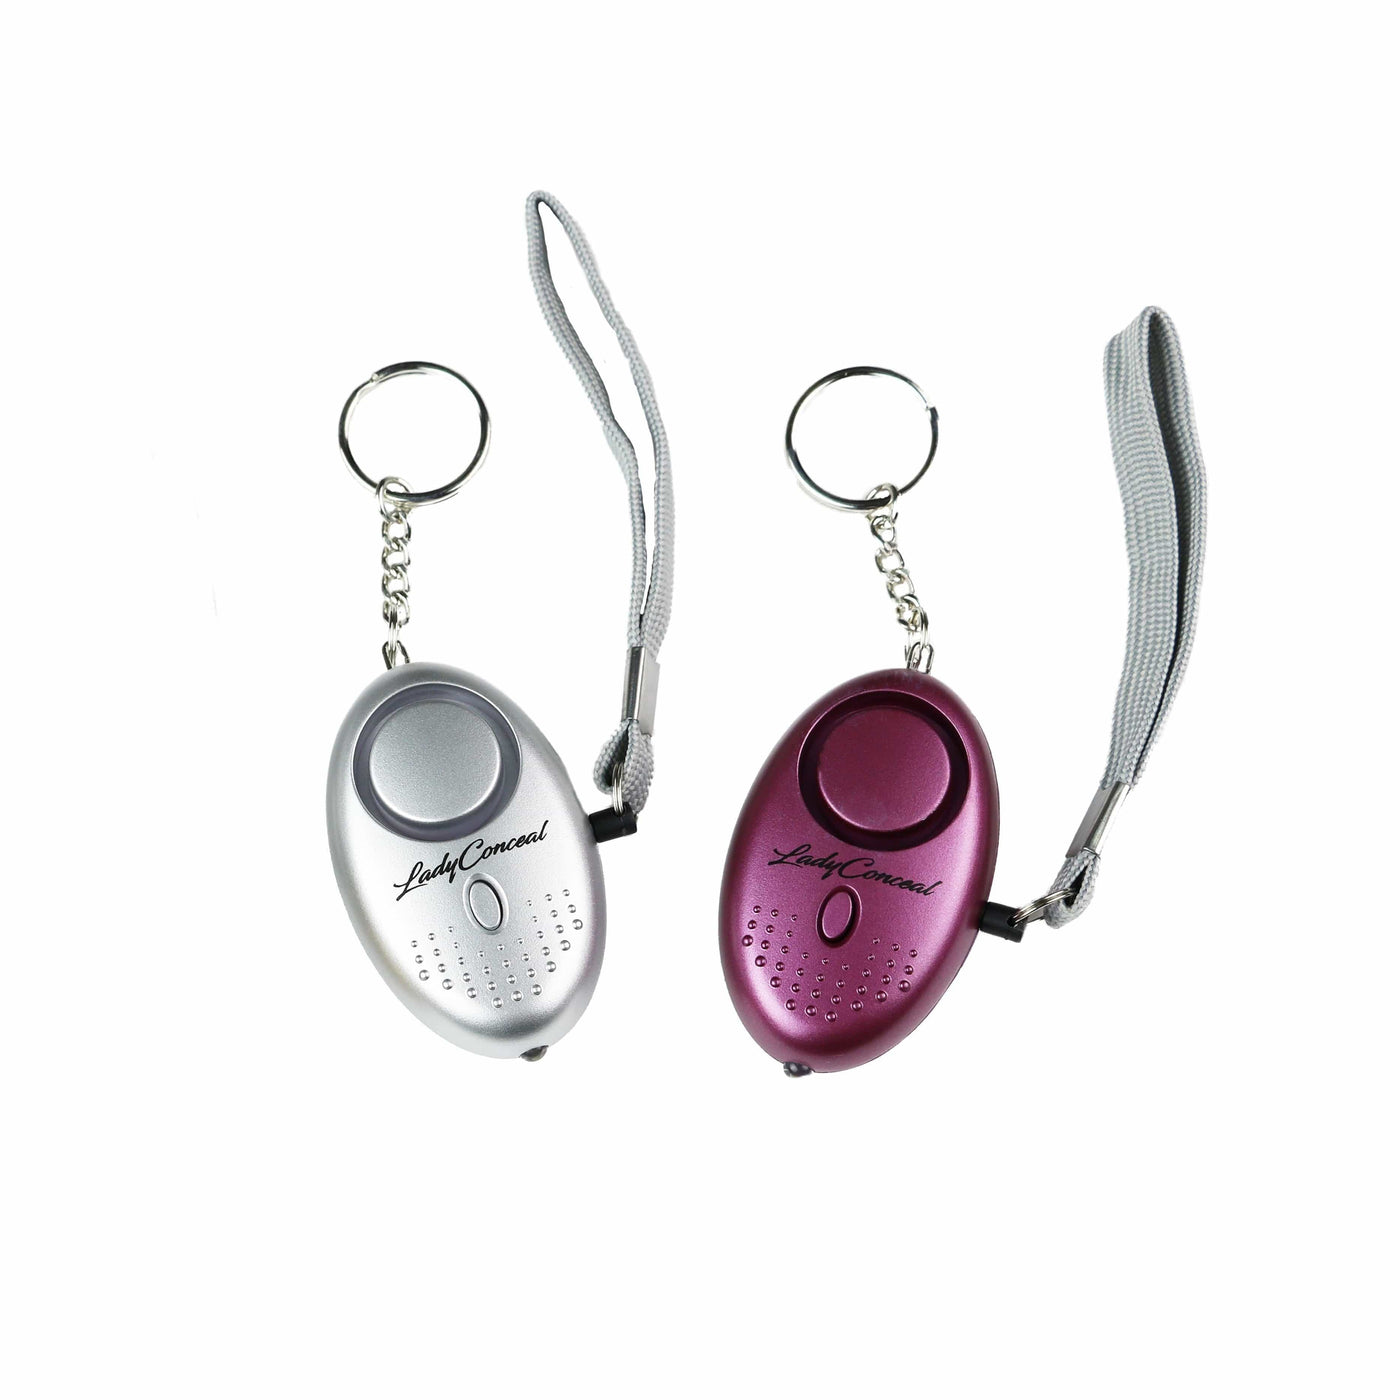 Lady Conceal Alarms Personal Self-Defense Security Alarm Keychains